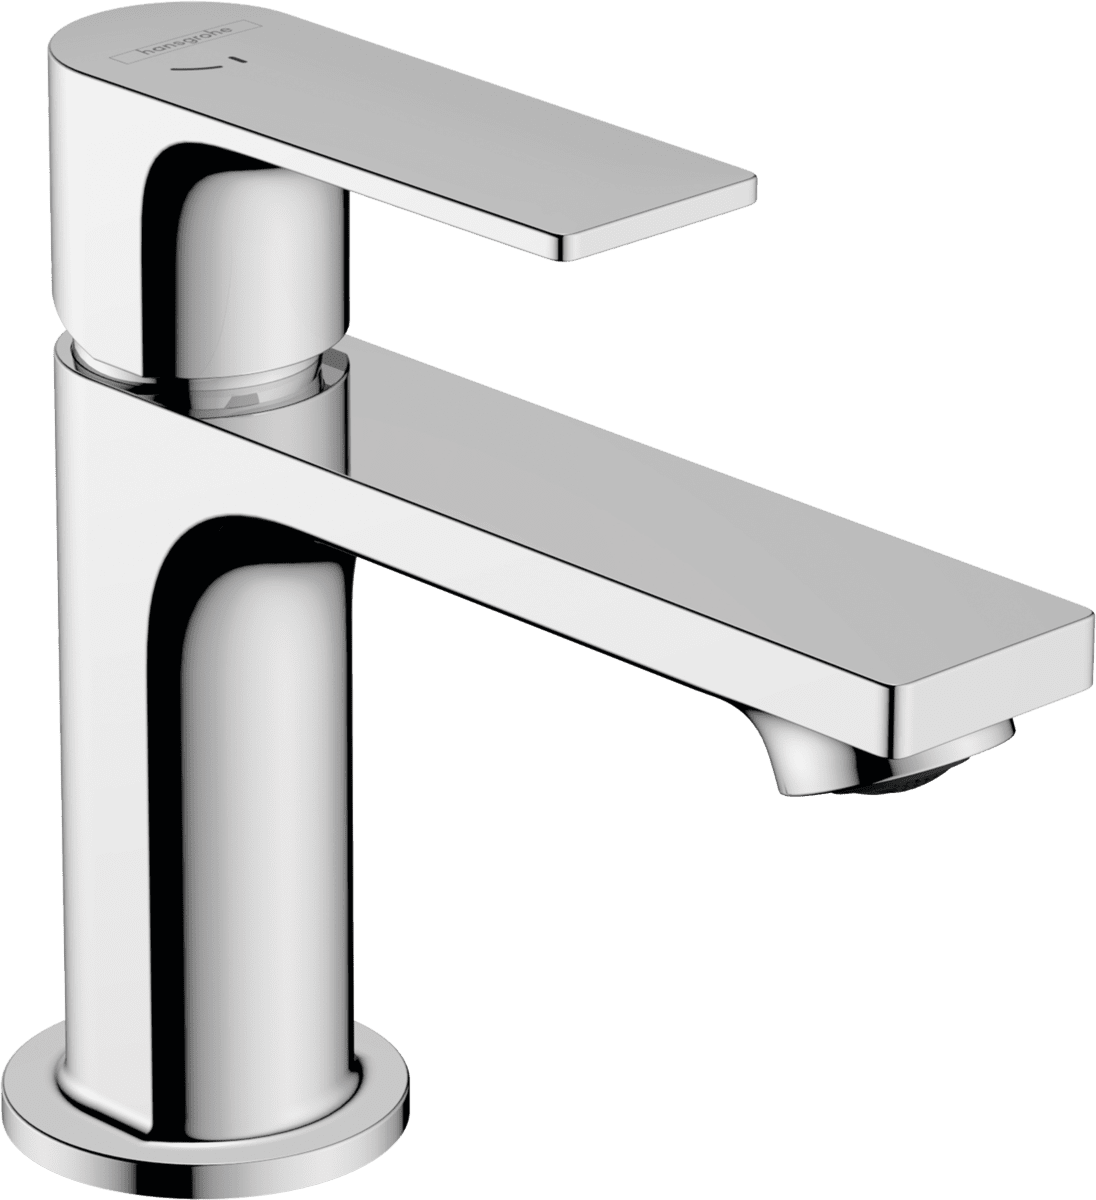 Picture of HANSGROHE Rebris E Single lever basin mixer 80 CoolStart with metal pop-up waste set #72585000 - Chrome